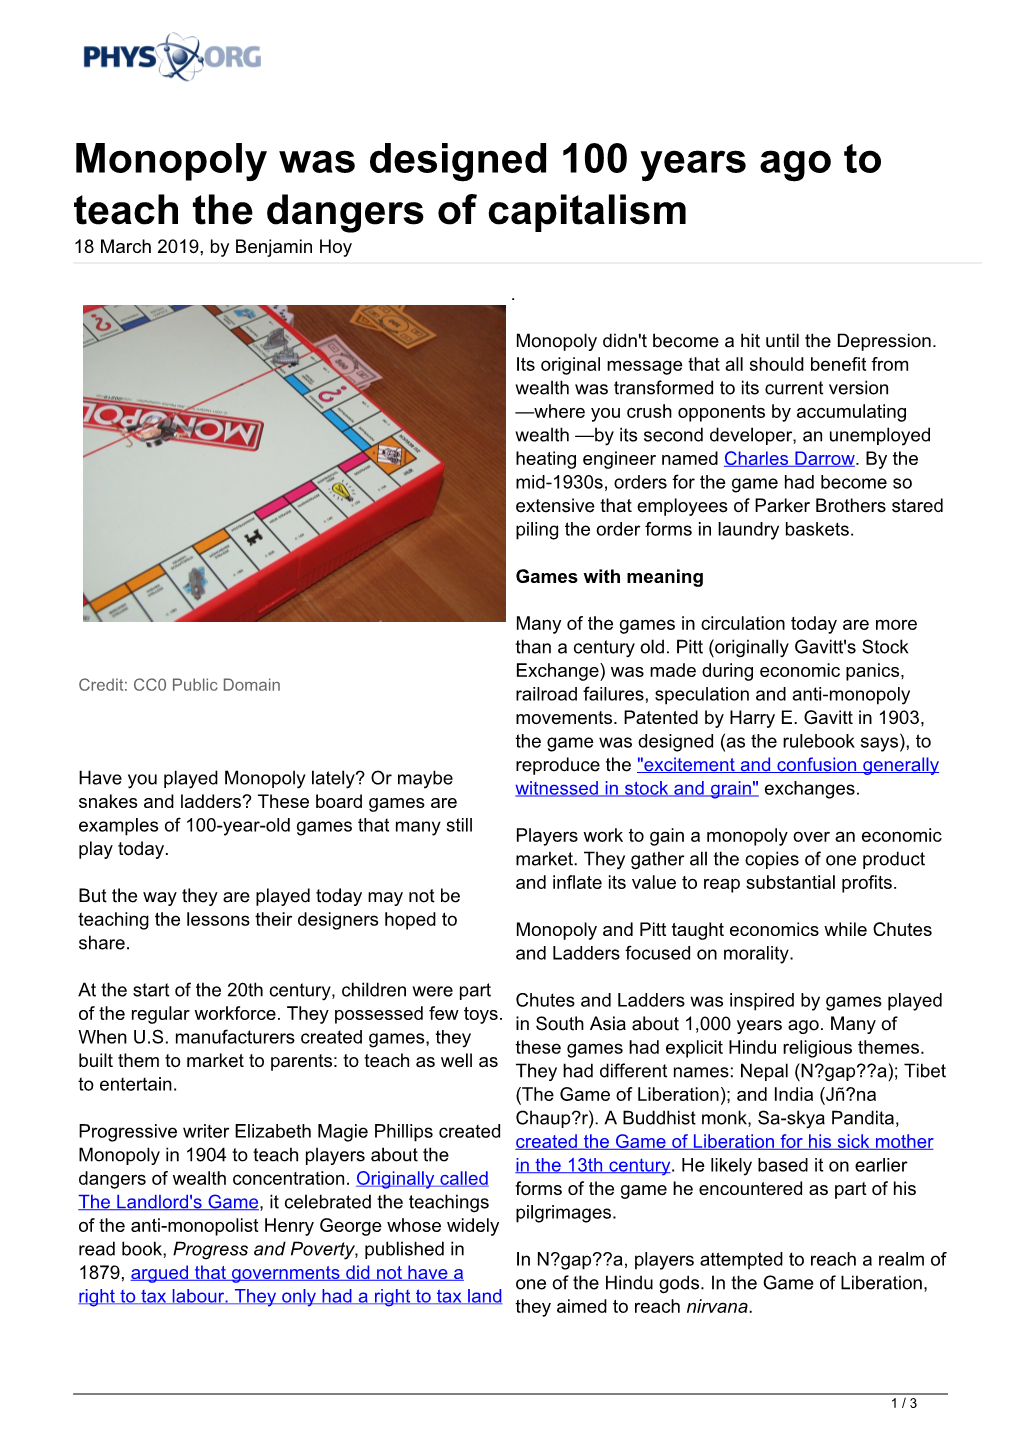 Monopoly Was Designed 100 Years Ago to Teach the Dangers of Capitalism 18 March 2019, by Benjamin Hoy